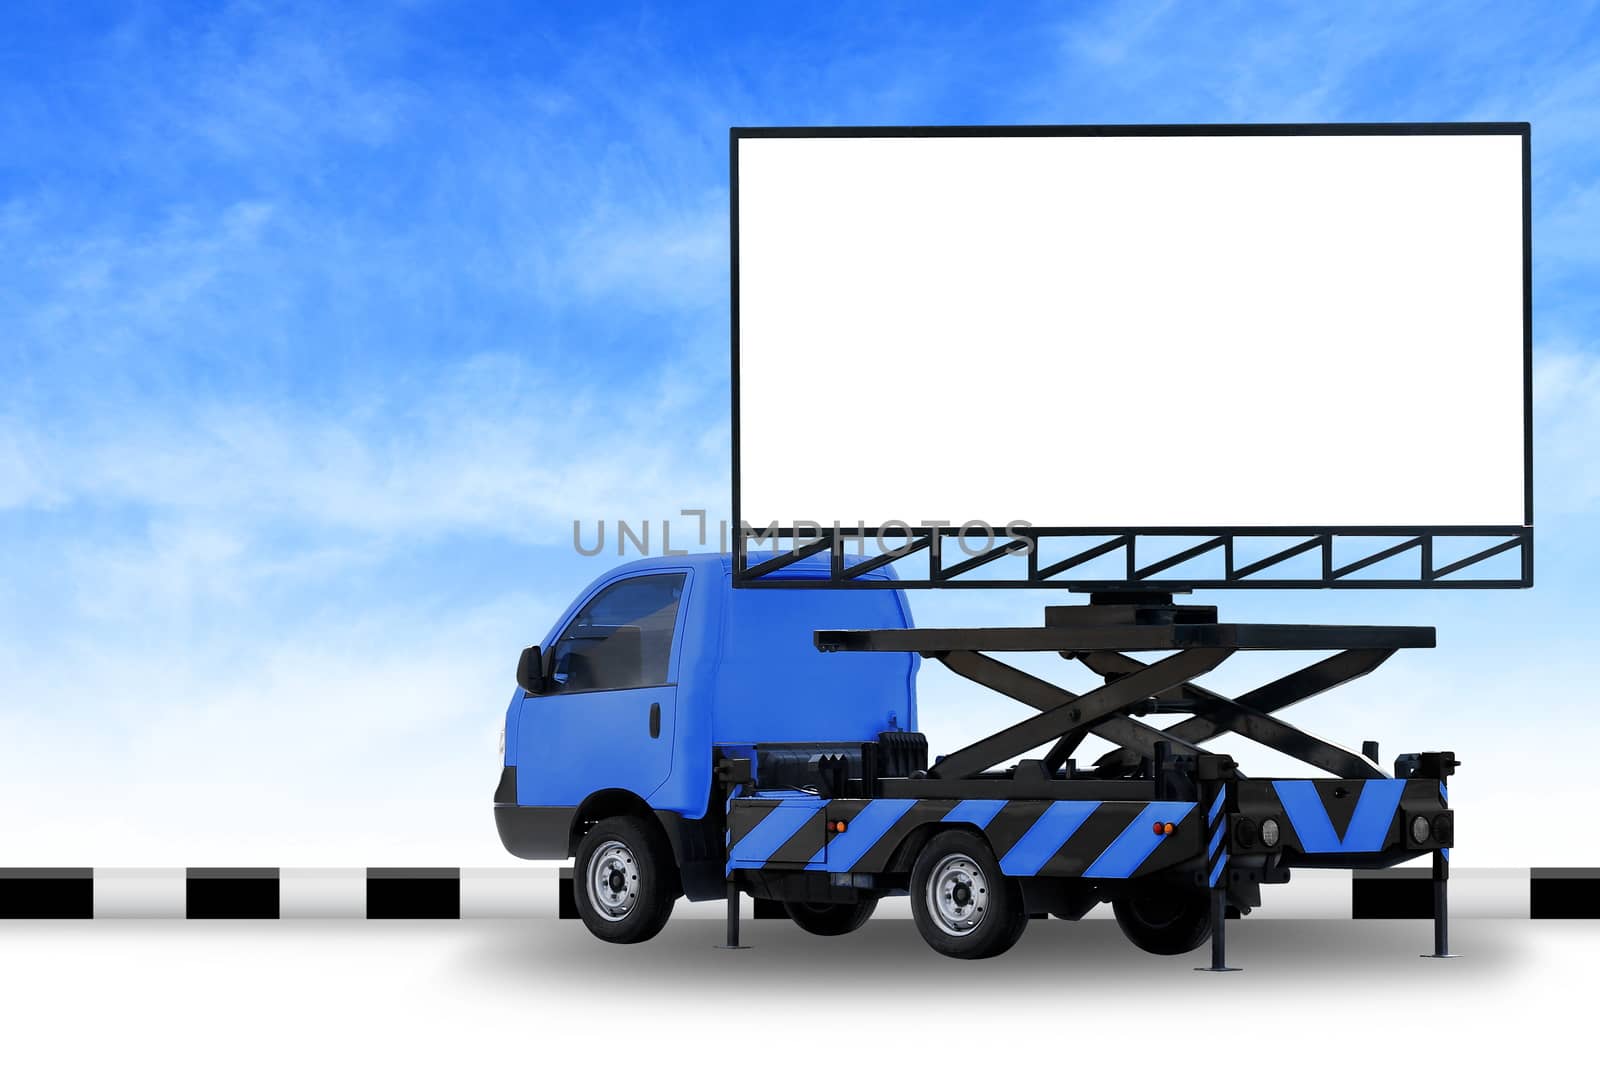 Billboard blank on car blue truck LED panel for sign Advertising isolated on background sky, Large banner and billboard Roadside for an advertisement large